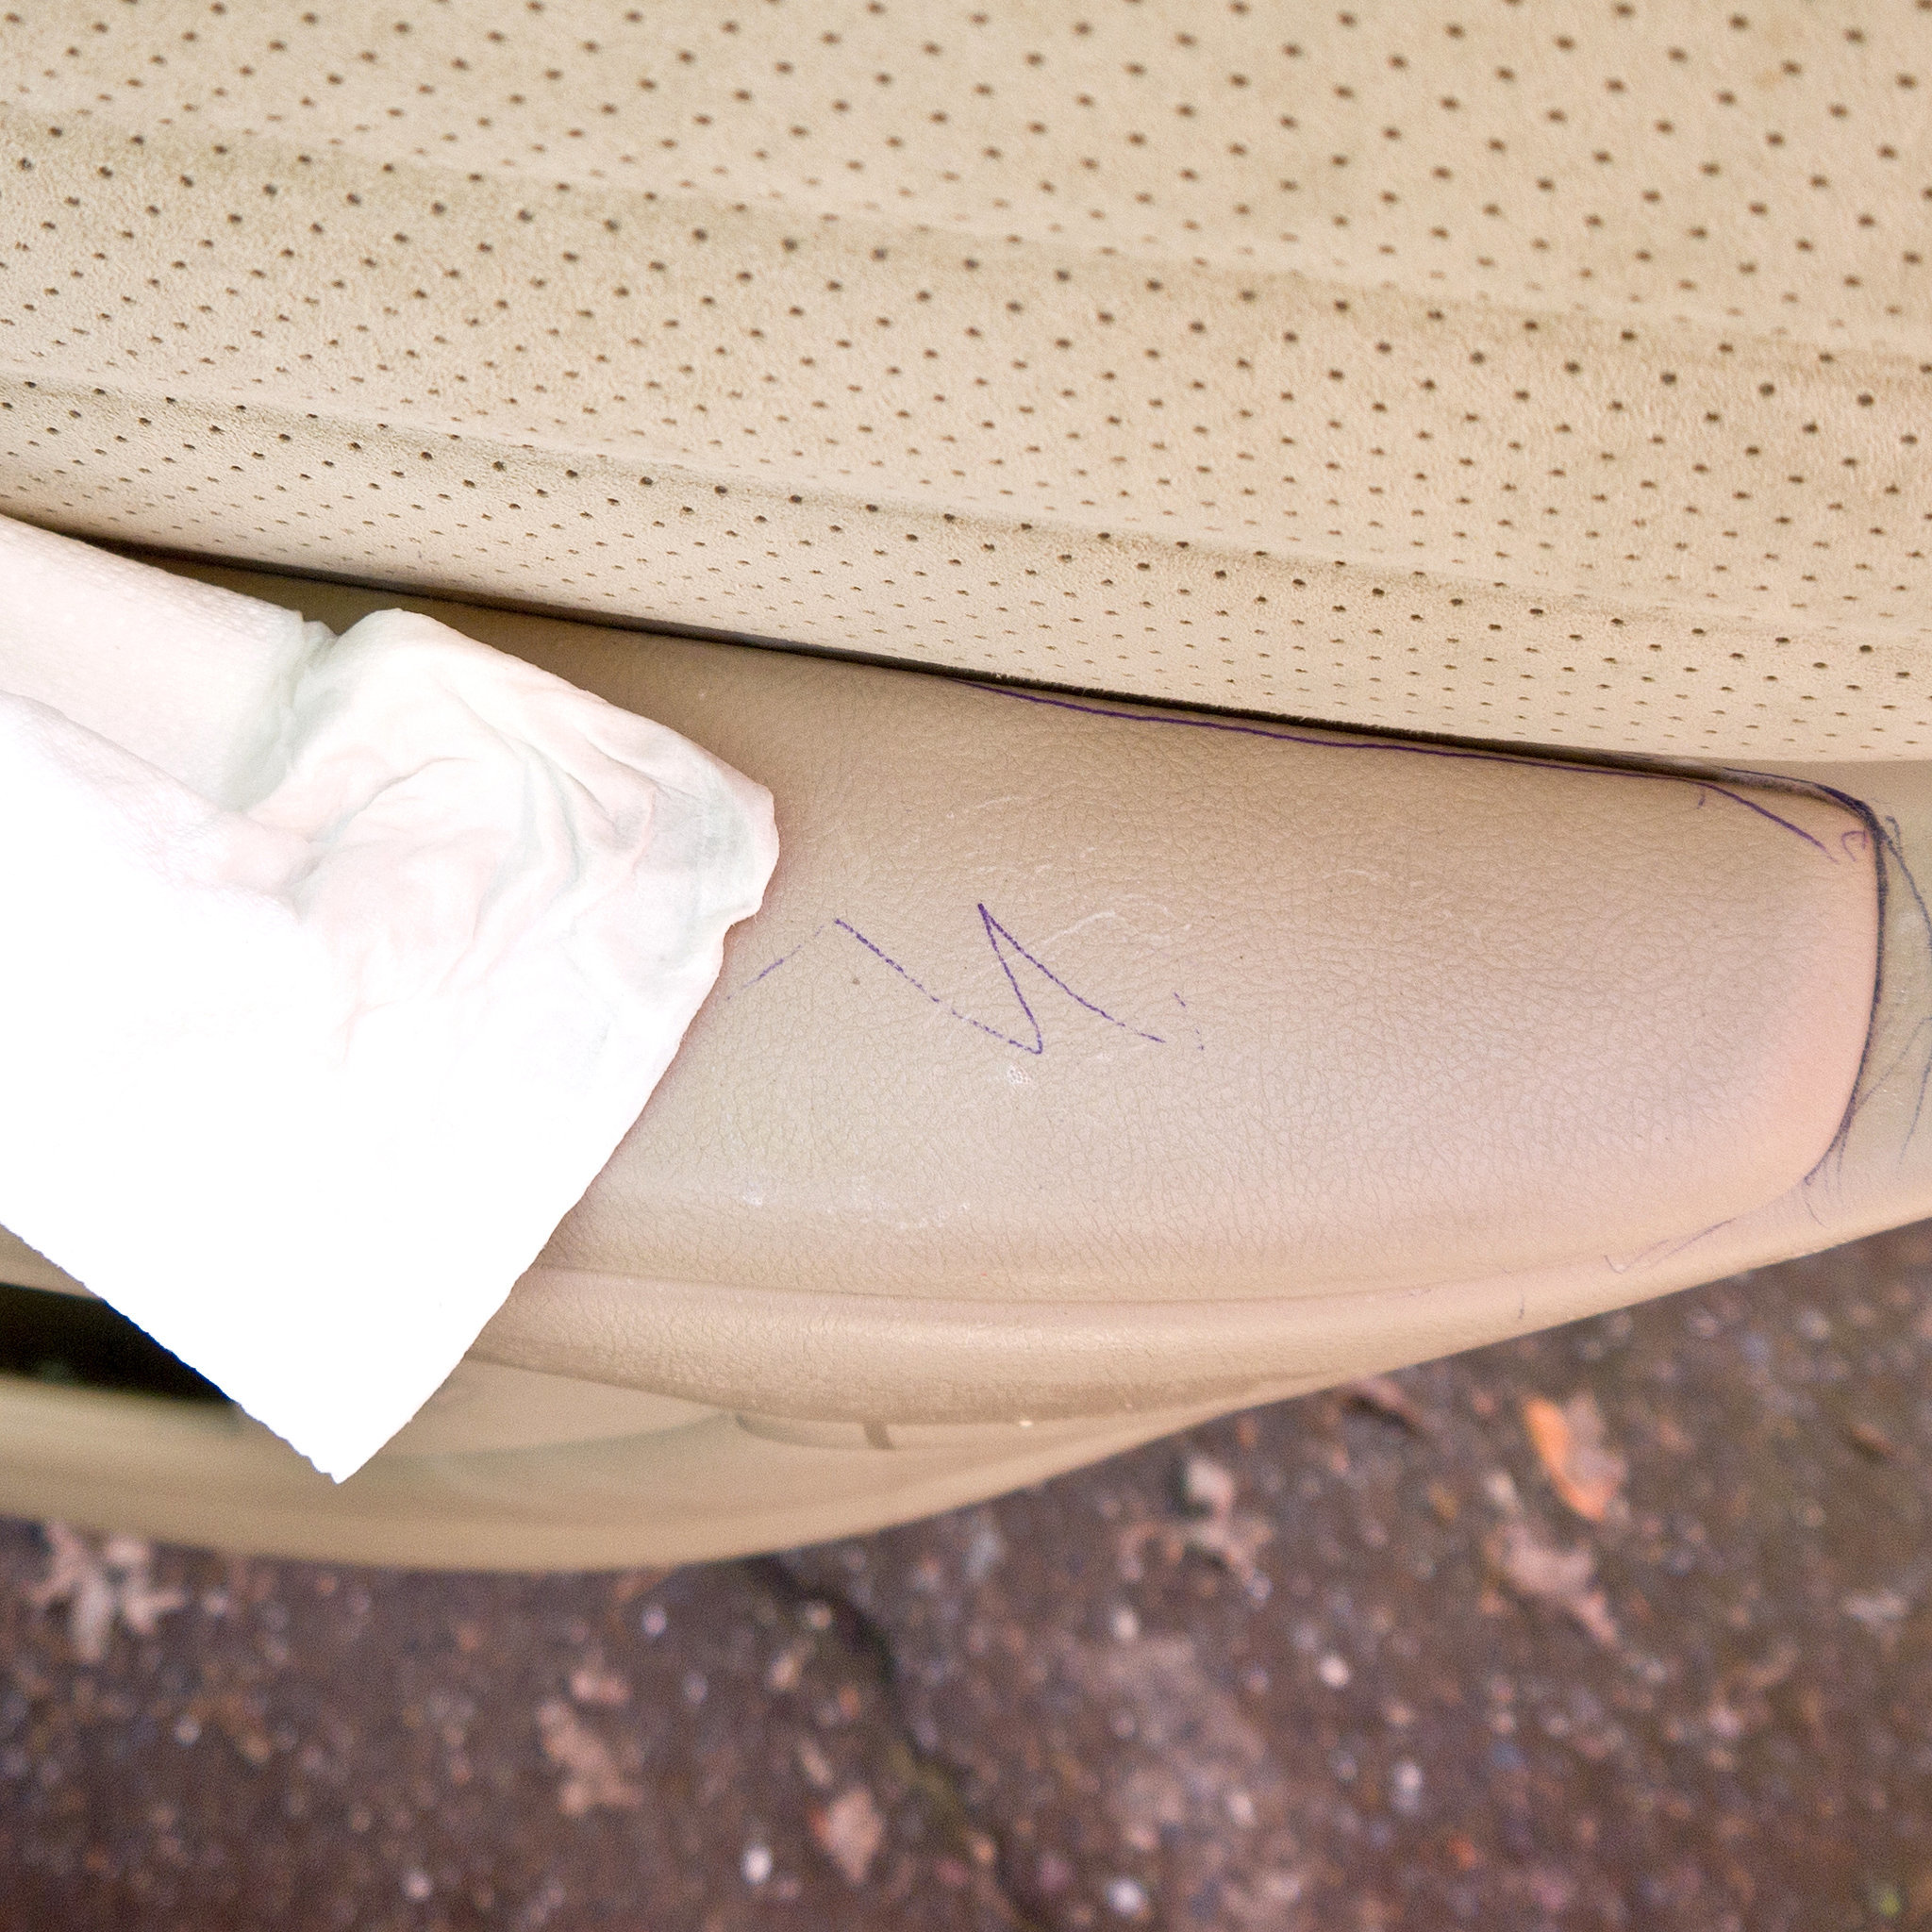 Remove Pen Marks From Car Interior, How To Get Pen Off Leather